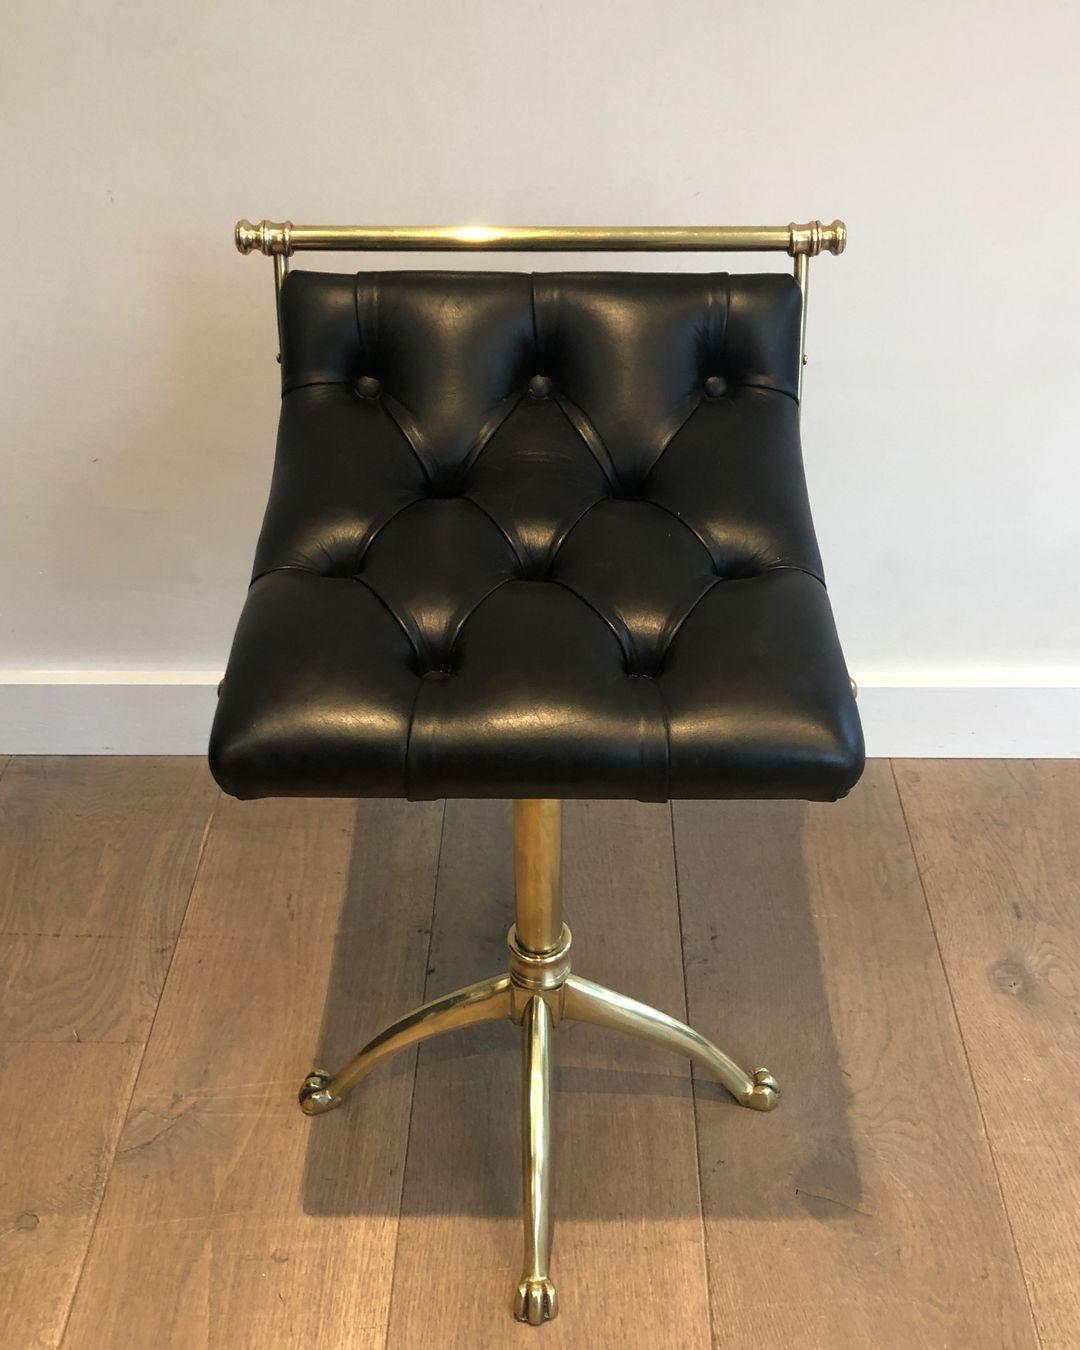 Brass stool with claw feet and leather seat. French work in the style of Maison Jansen. Circa 1940
